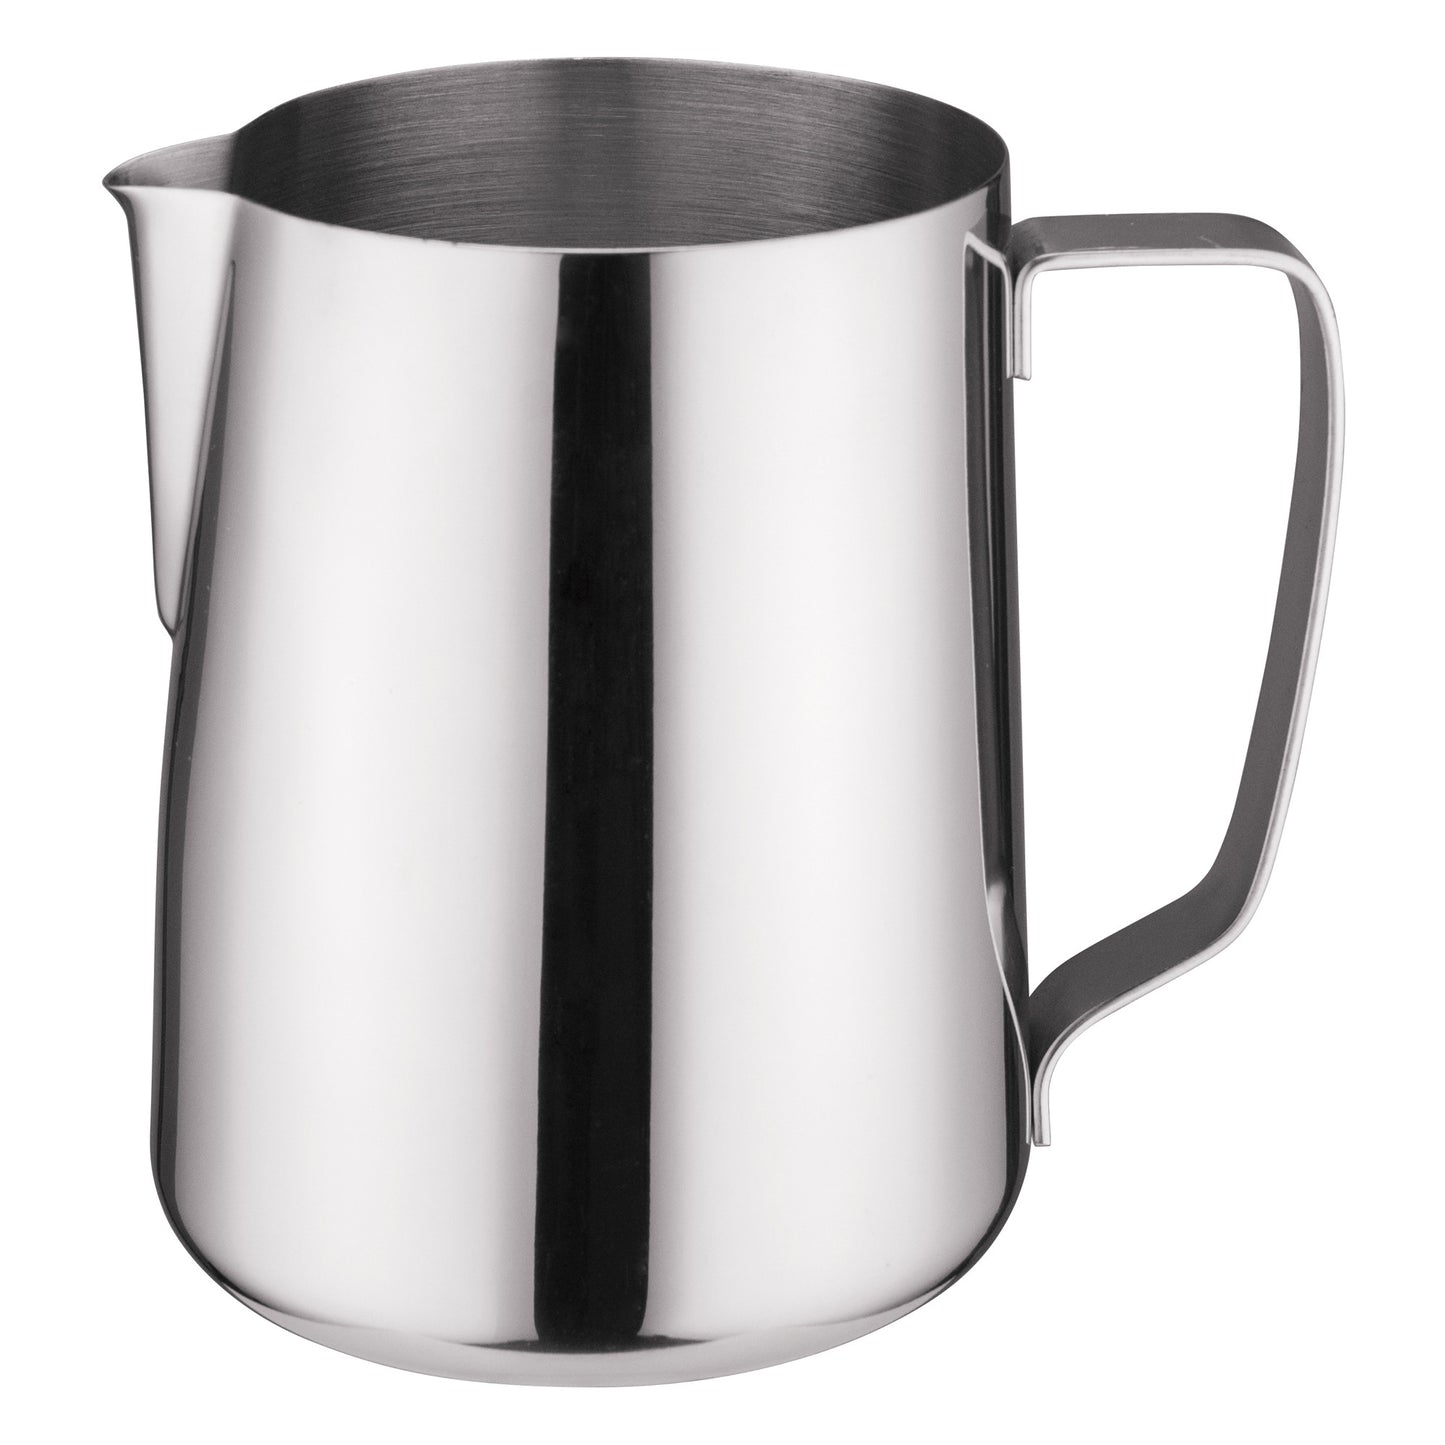 WP-50 - Frothing Pitcher, Stainless Steel - 50 oz